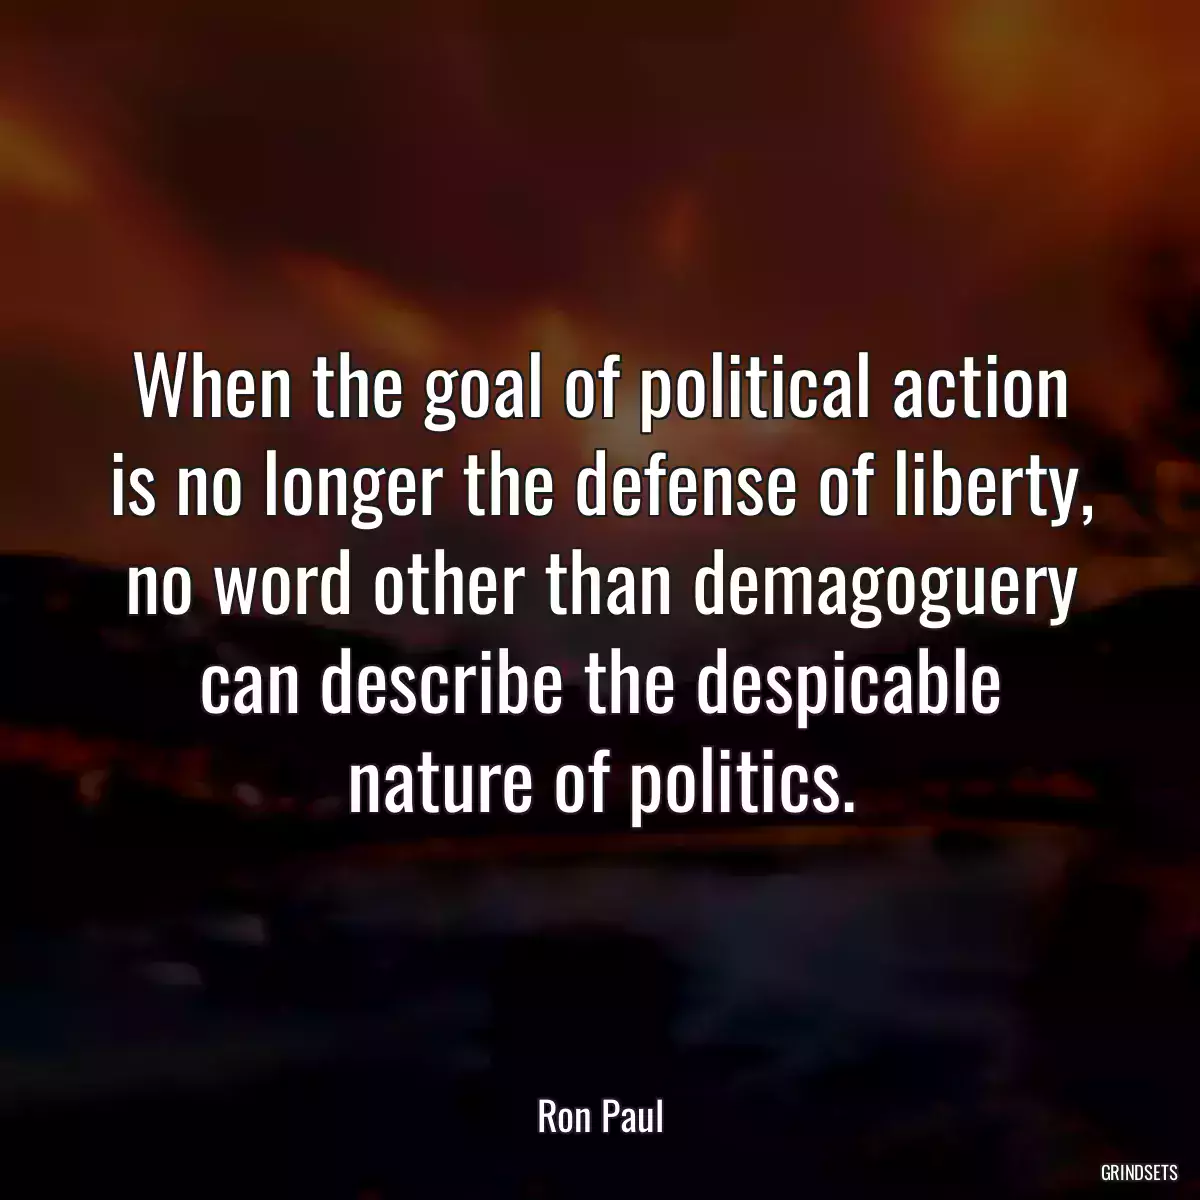 When the goal of political action is no longer the defense of liberty, no word other than demagoguery can describe the despicable nature of politics.